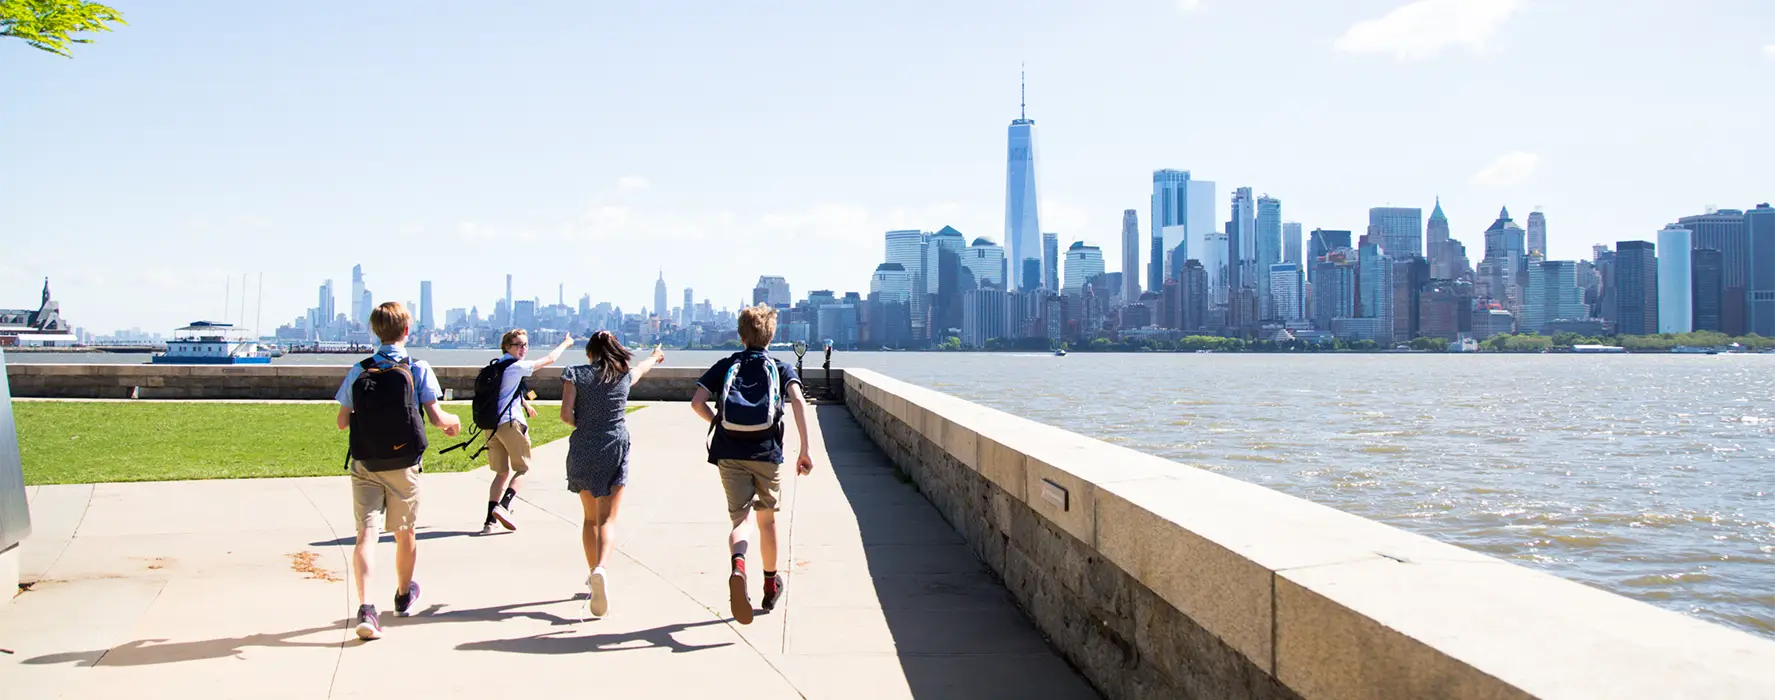 A group of 4 students running down a sidewalk pointing at the NYC skyscrapers across the water.